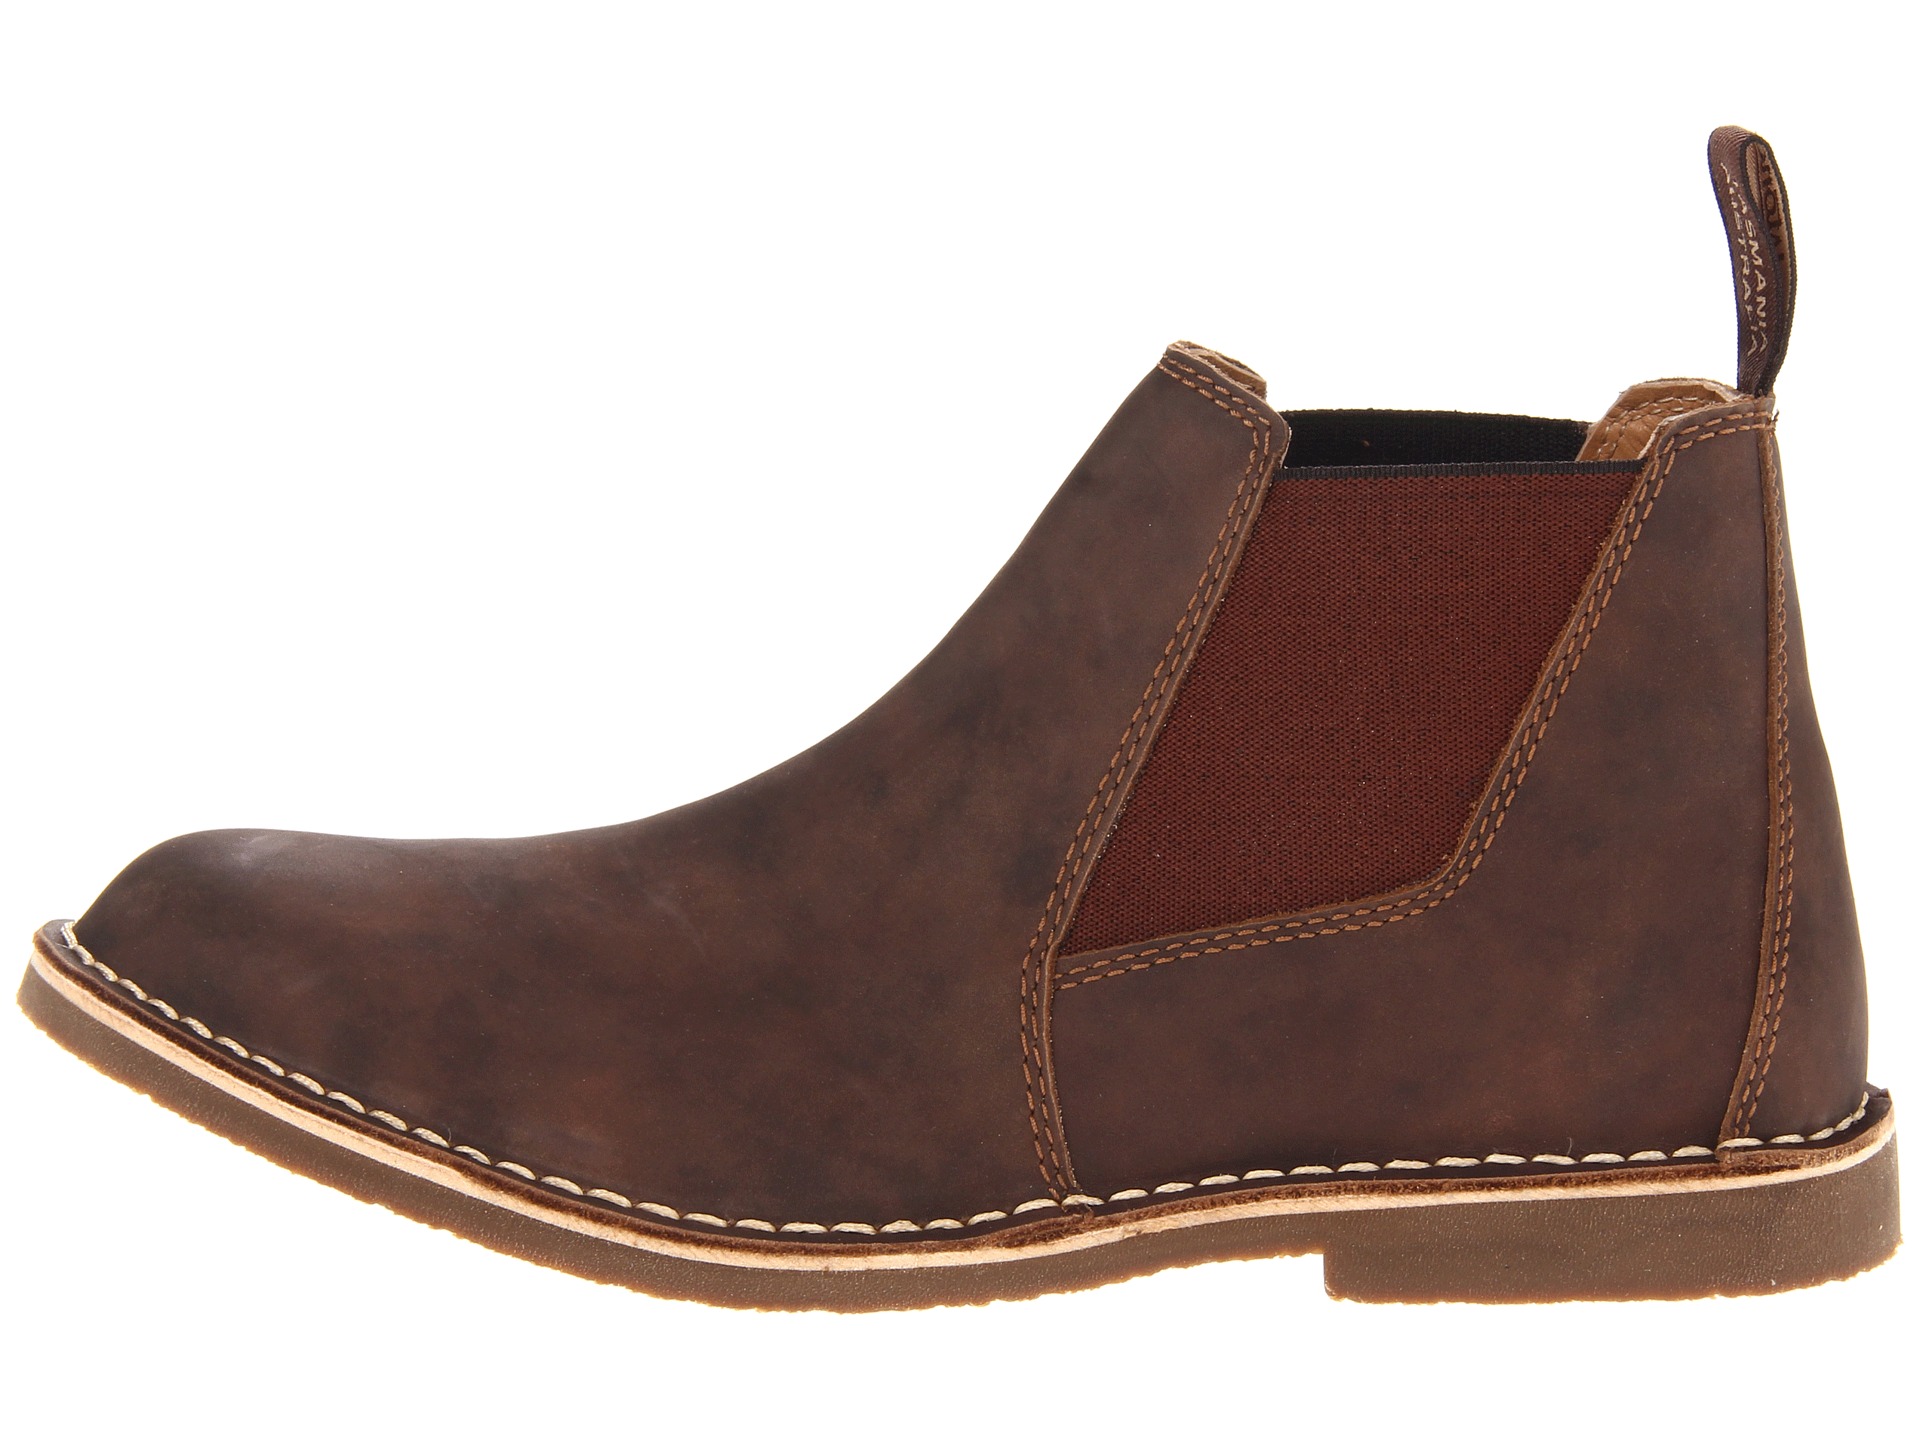 Blundstone BL1314 Rustic Brown - Zappos.com Free Shipping BOTH Ways